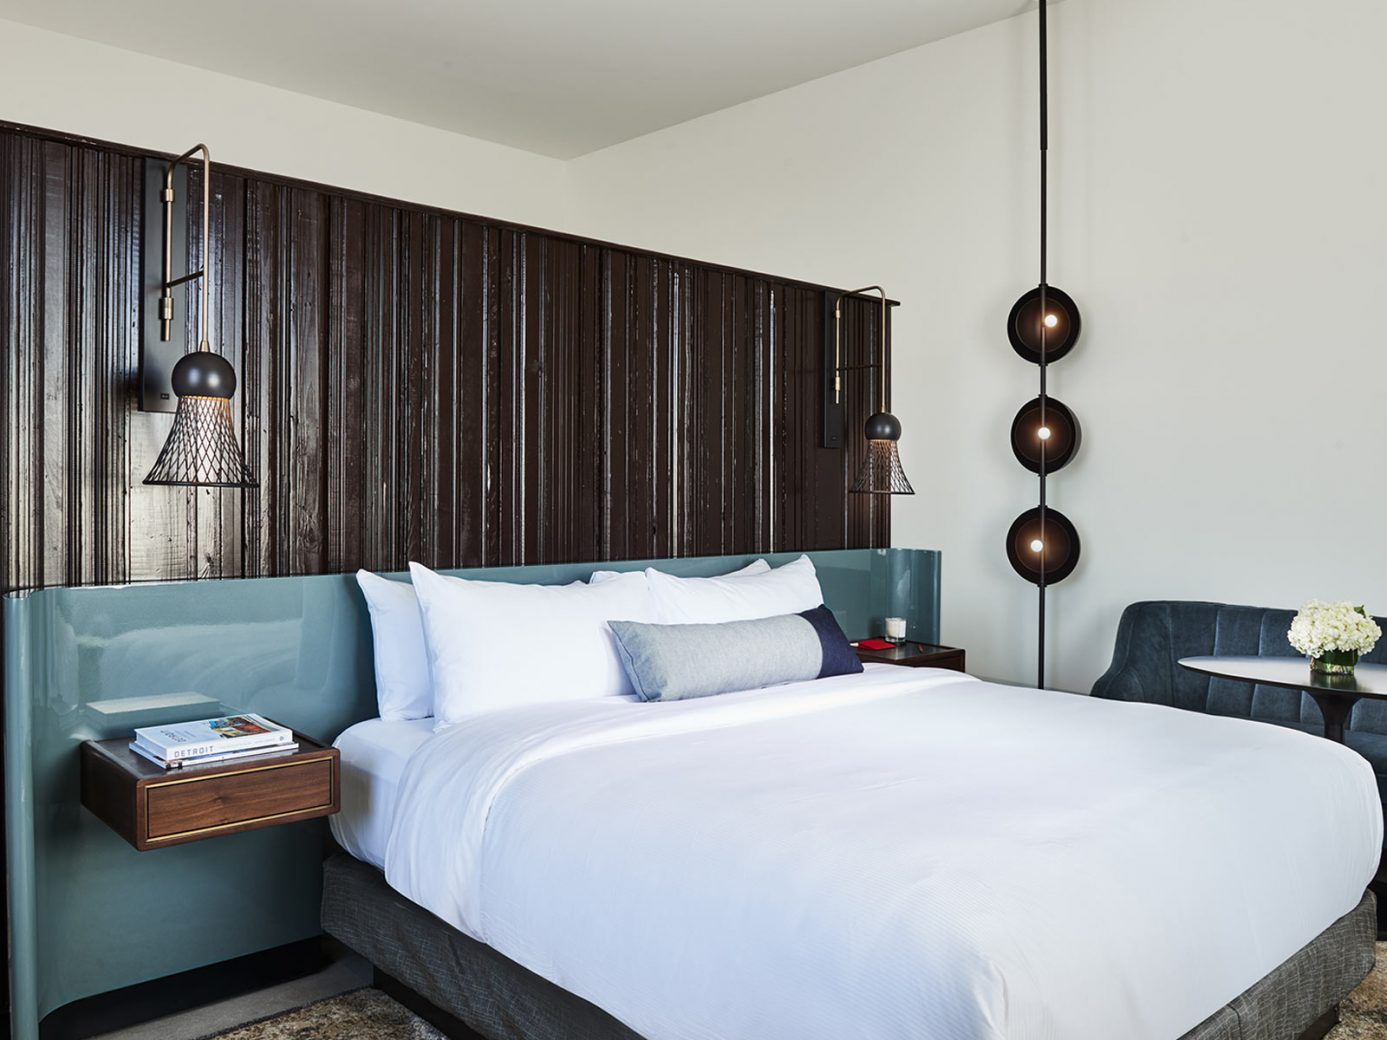 Detroit boutique hotel room with a wooden divider